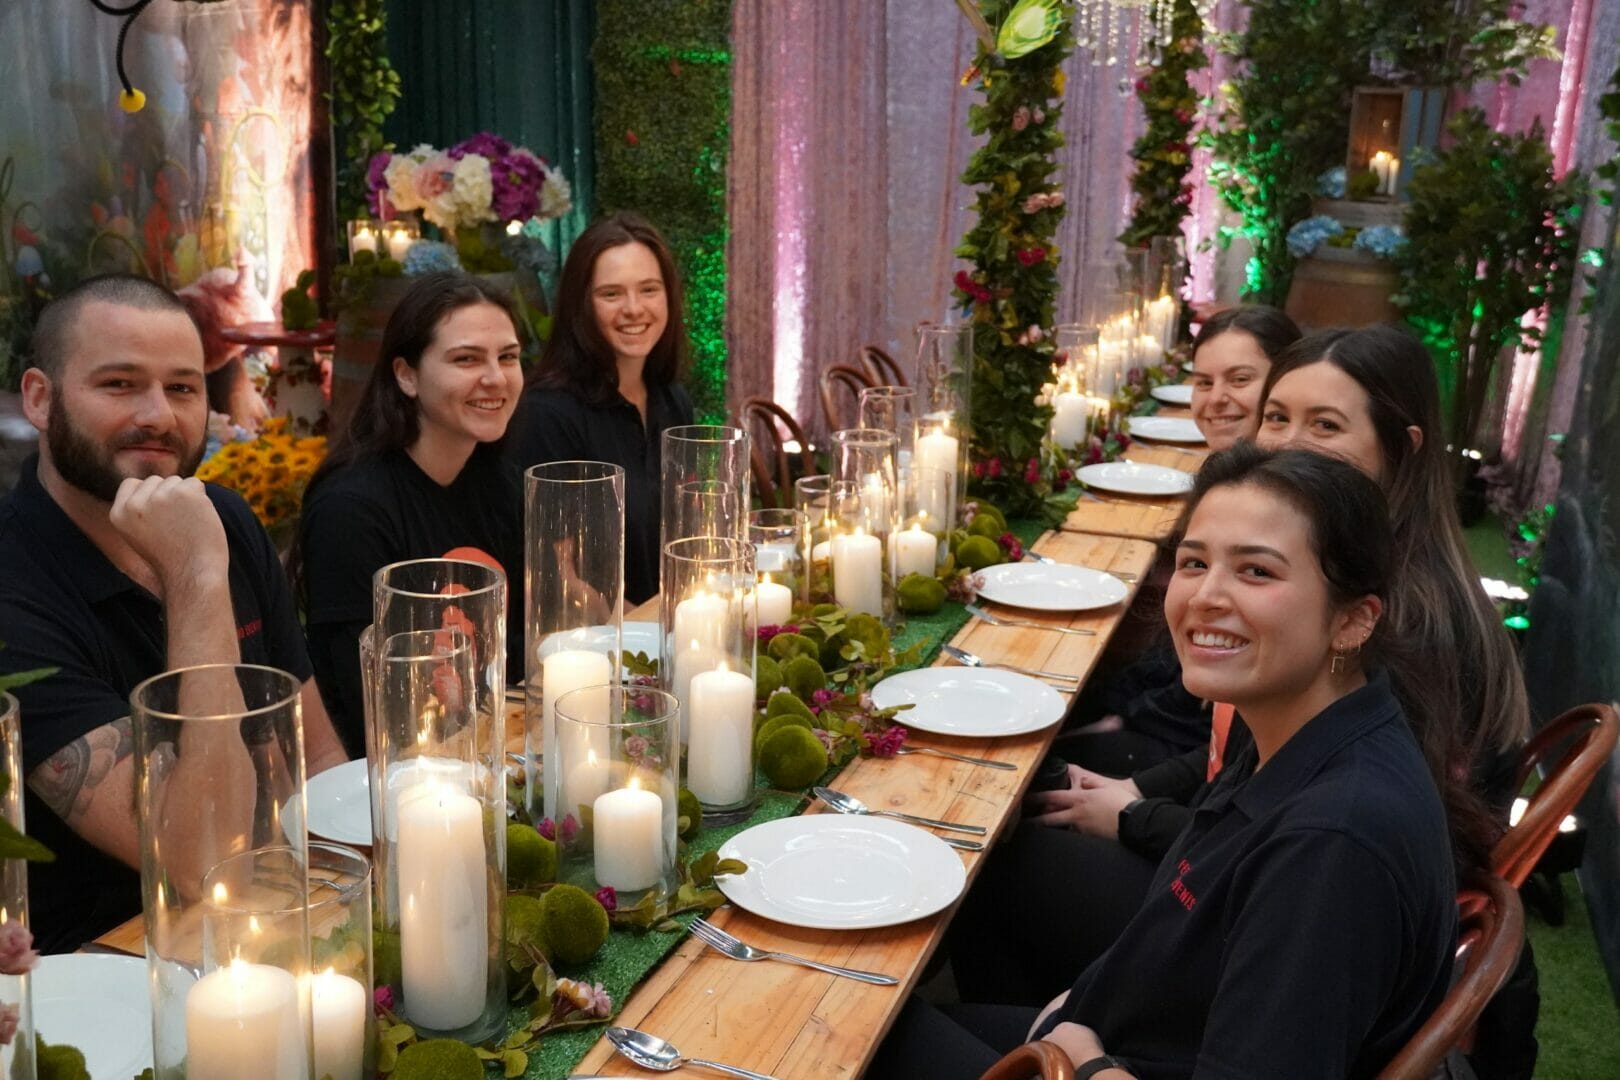 Feel good events team members sitting at an enchanted garden themed party setup.